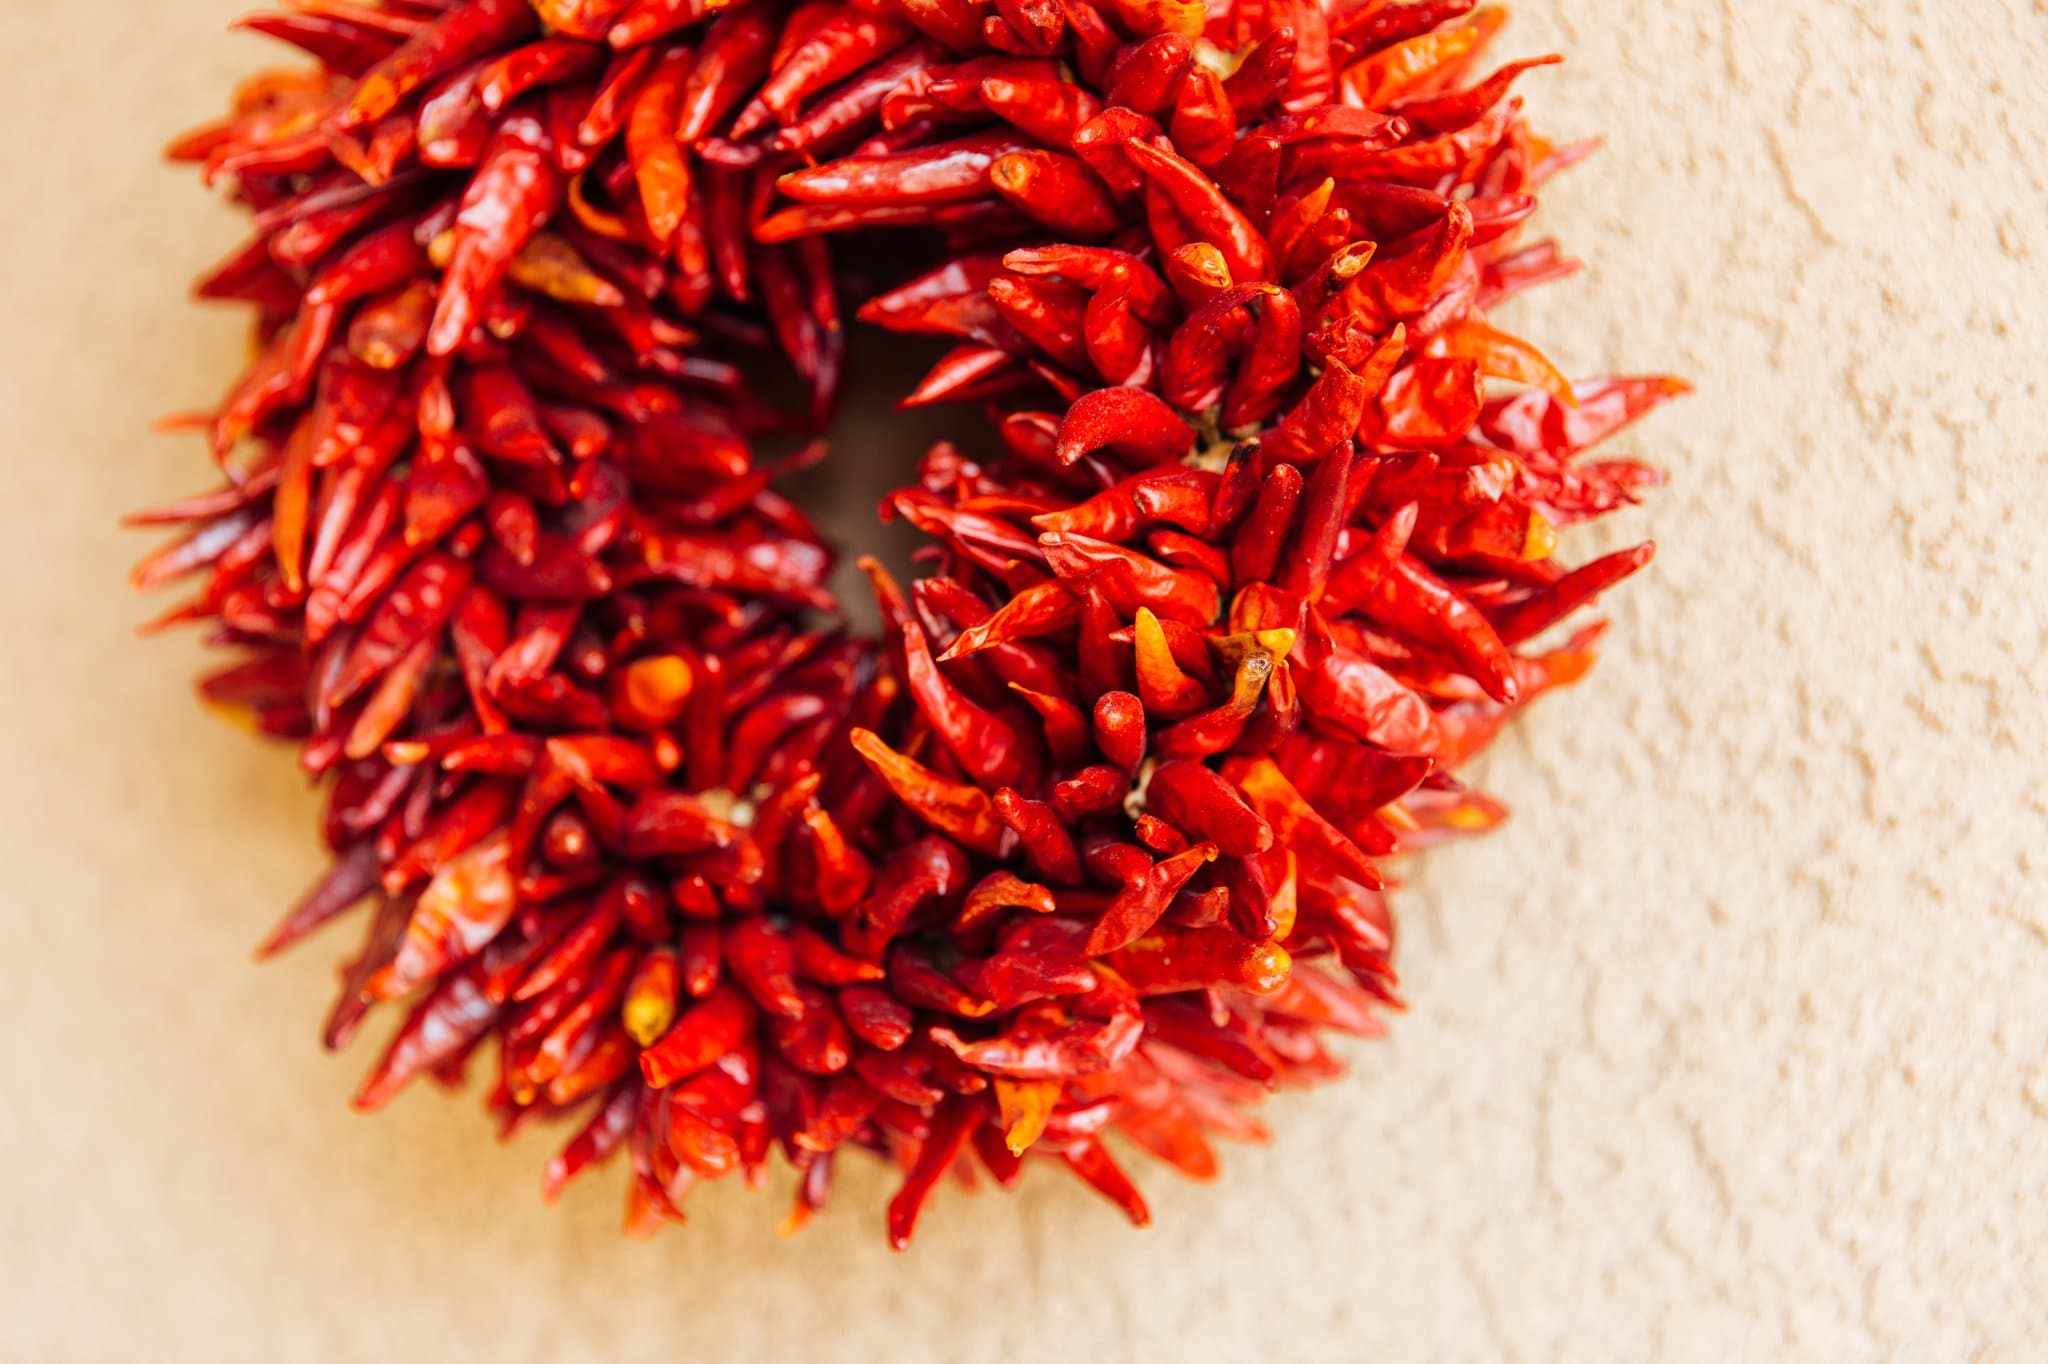 A hand-made chile pequin wreath hangs on a textured beige wall, providing a vibrant and spicy decoration.